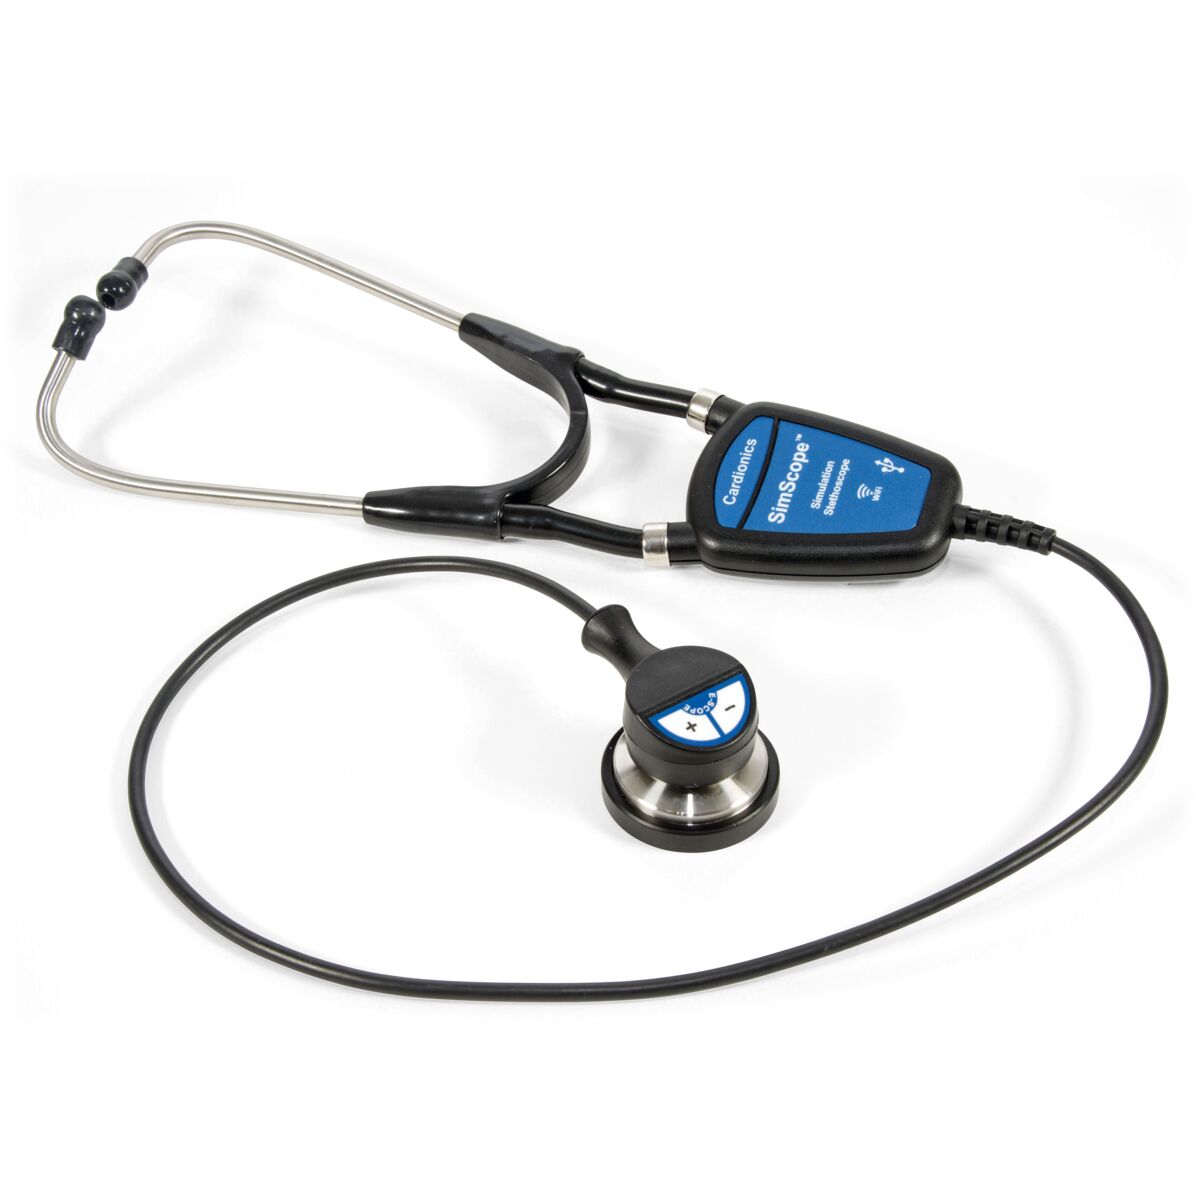 Medical devices: a stethoscope for auscultation of patients and